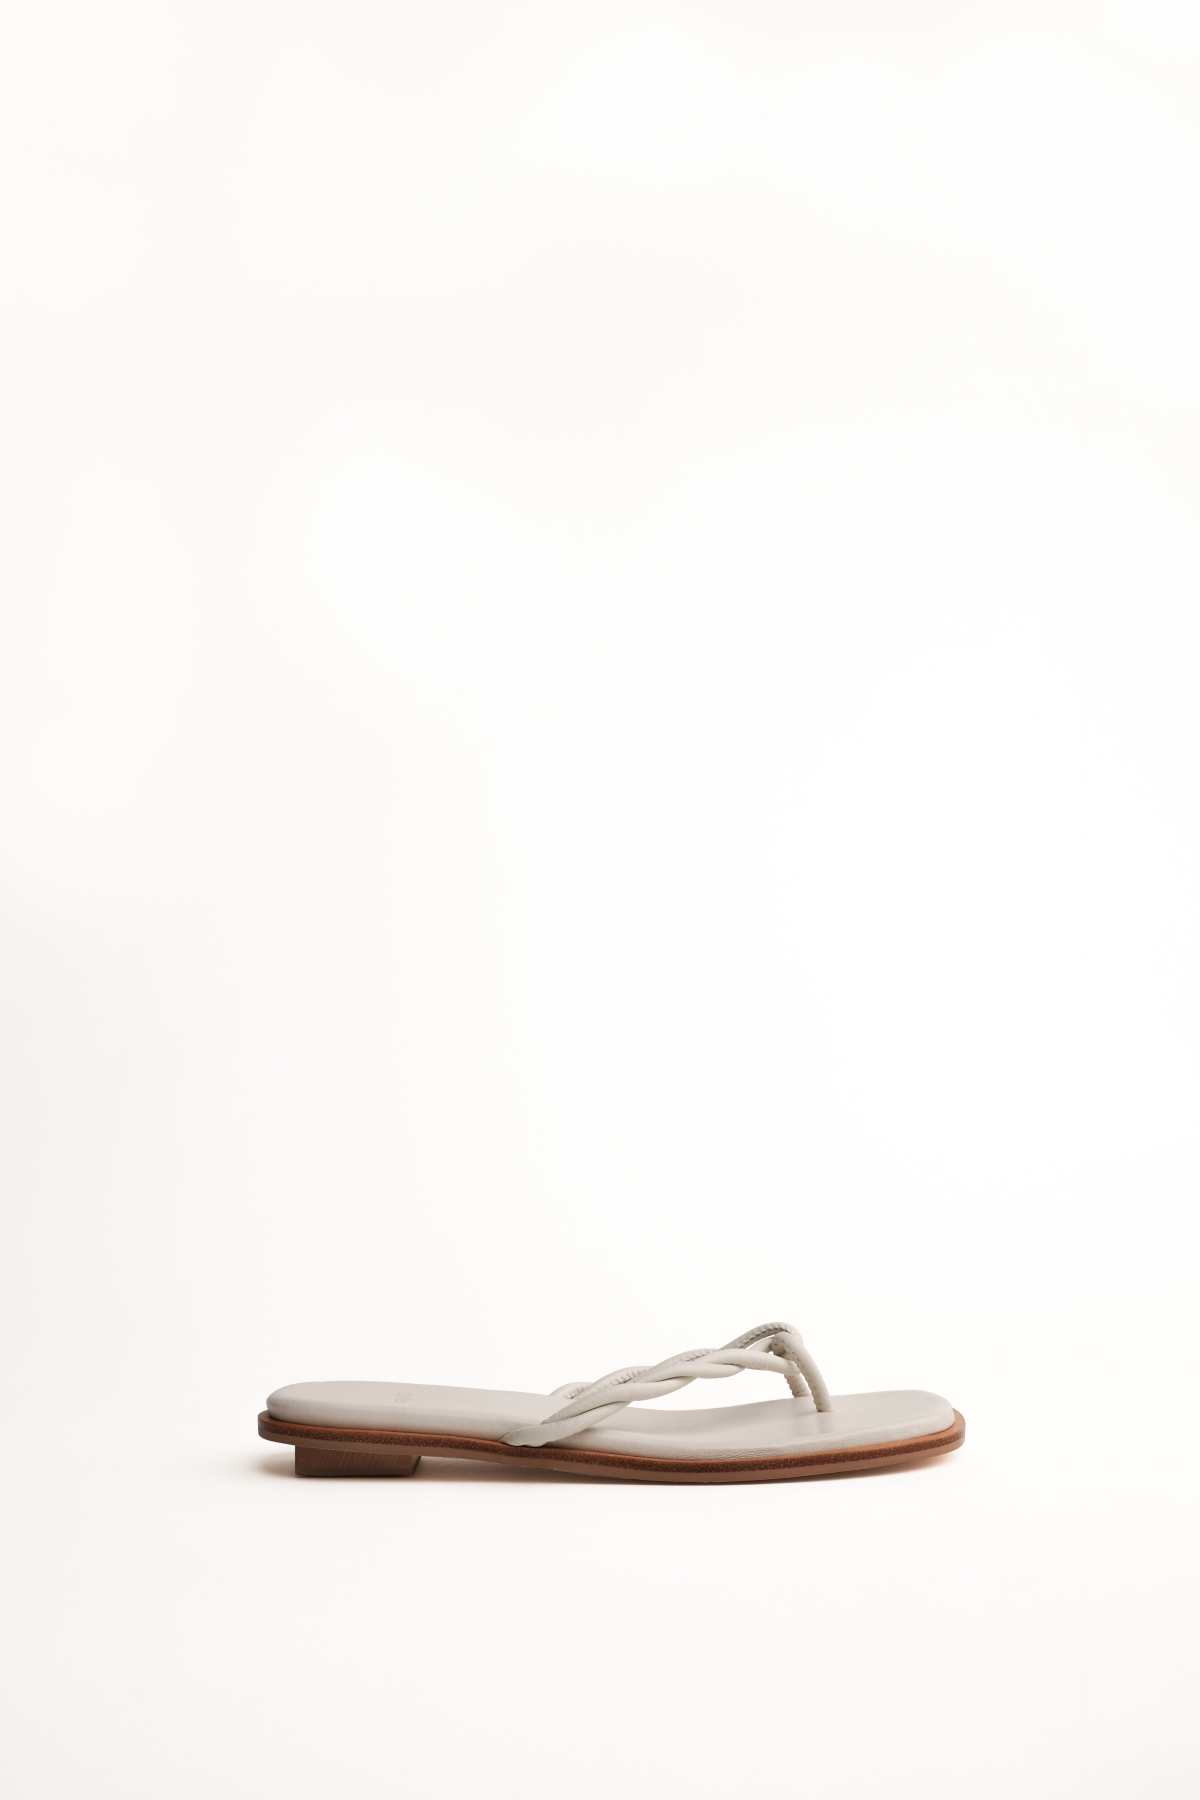 00_ROPE WAVE-MAPLE SANDAL OFF WHITE